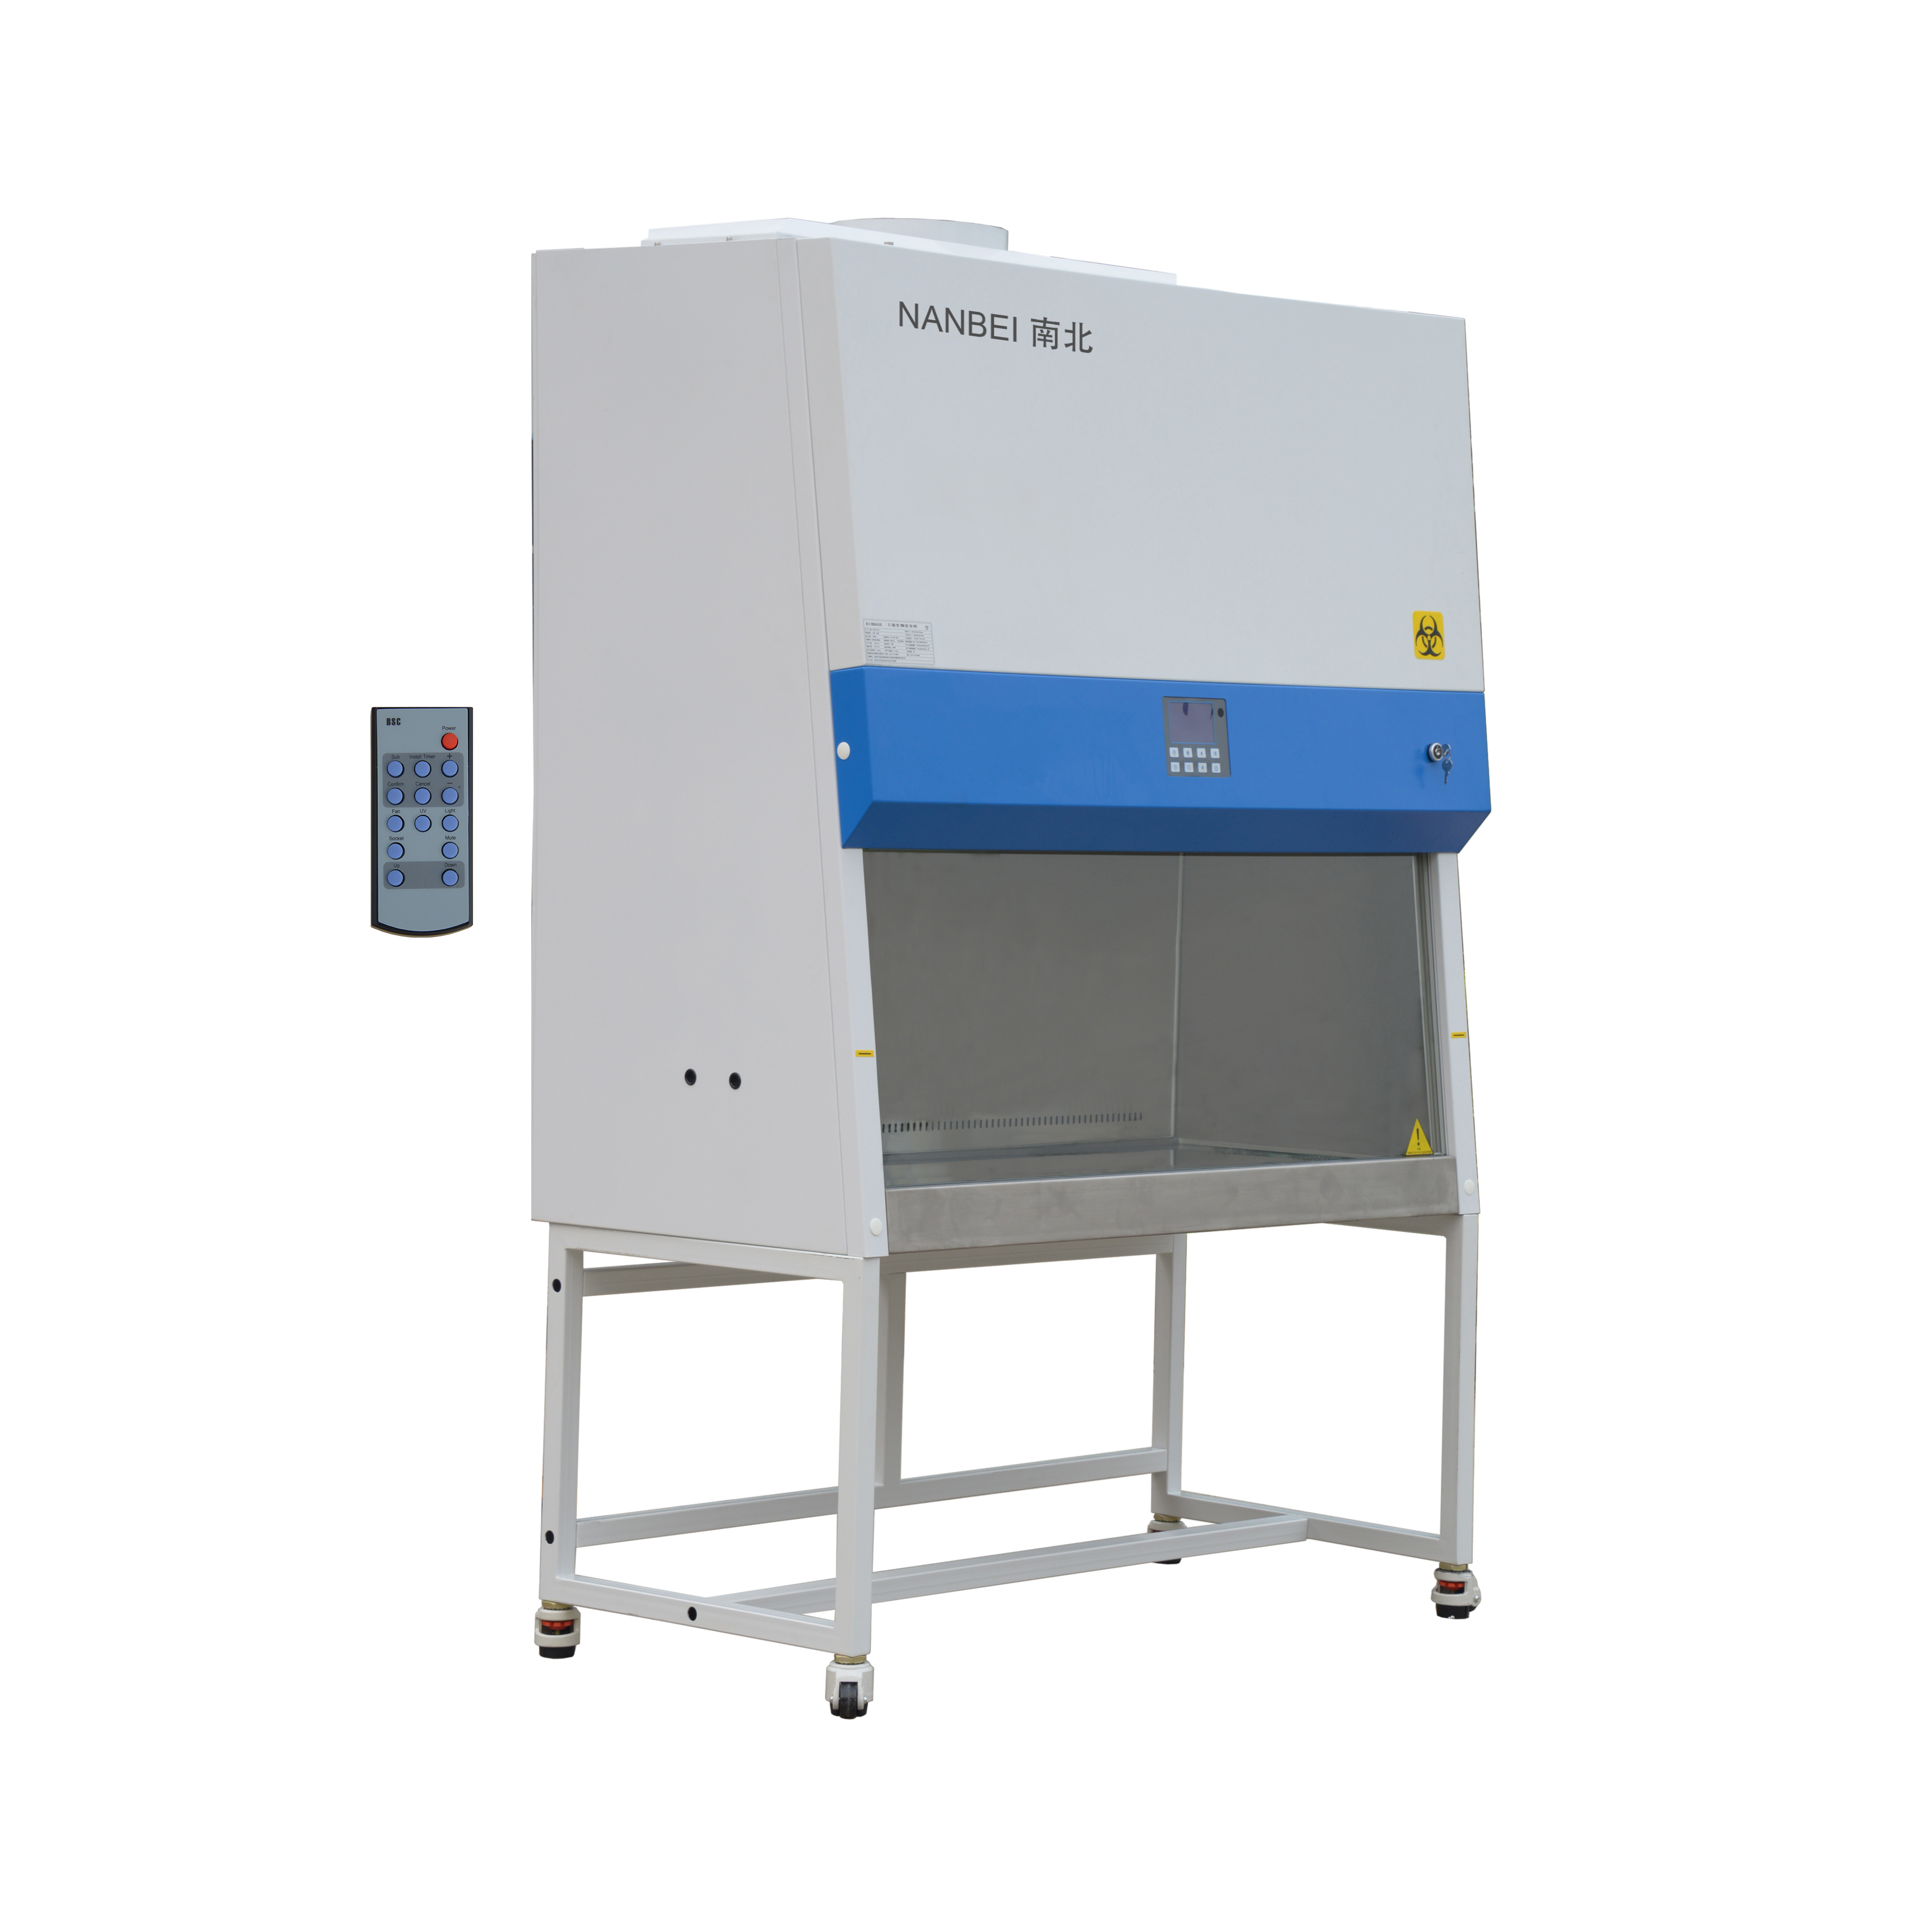 30% air exhaust double person Biological safety cabinet